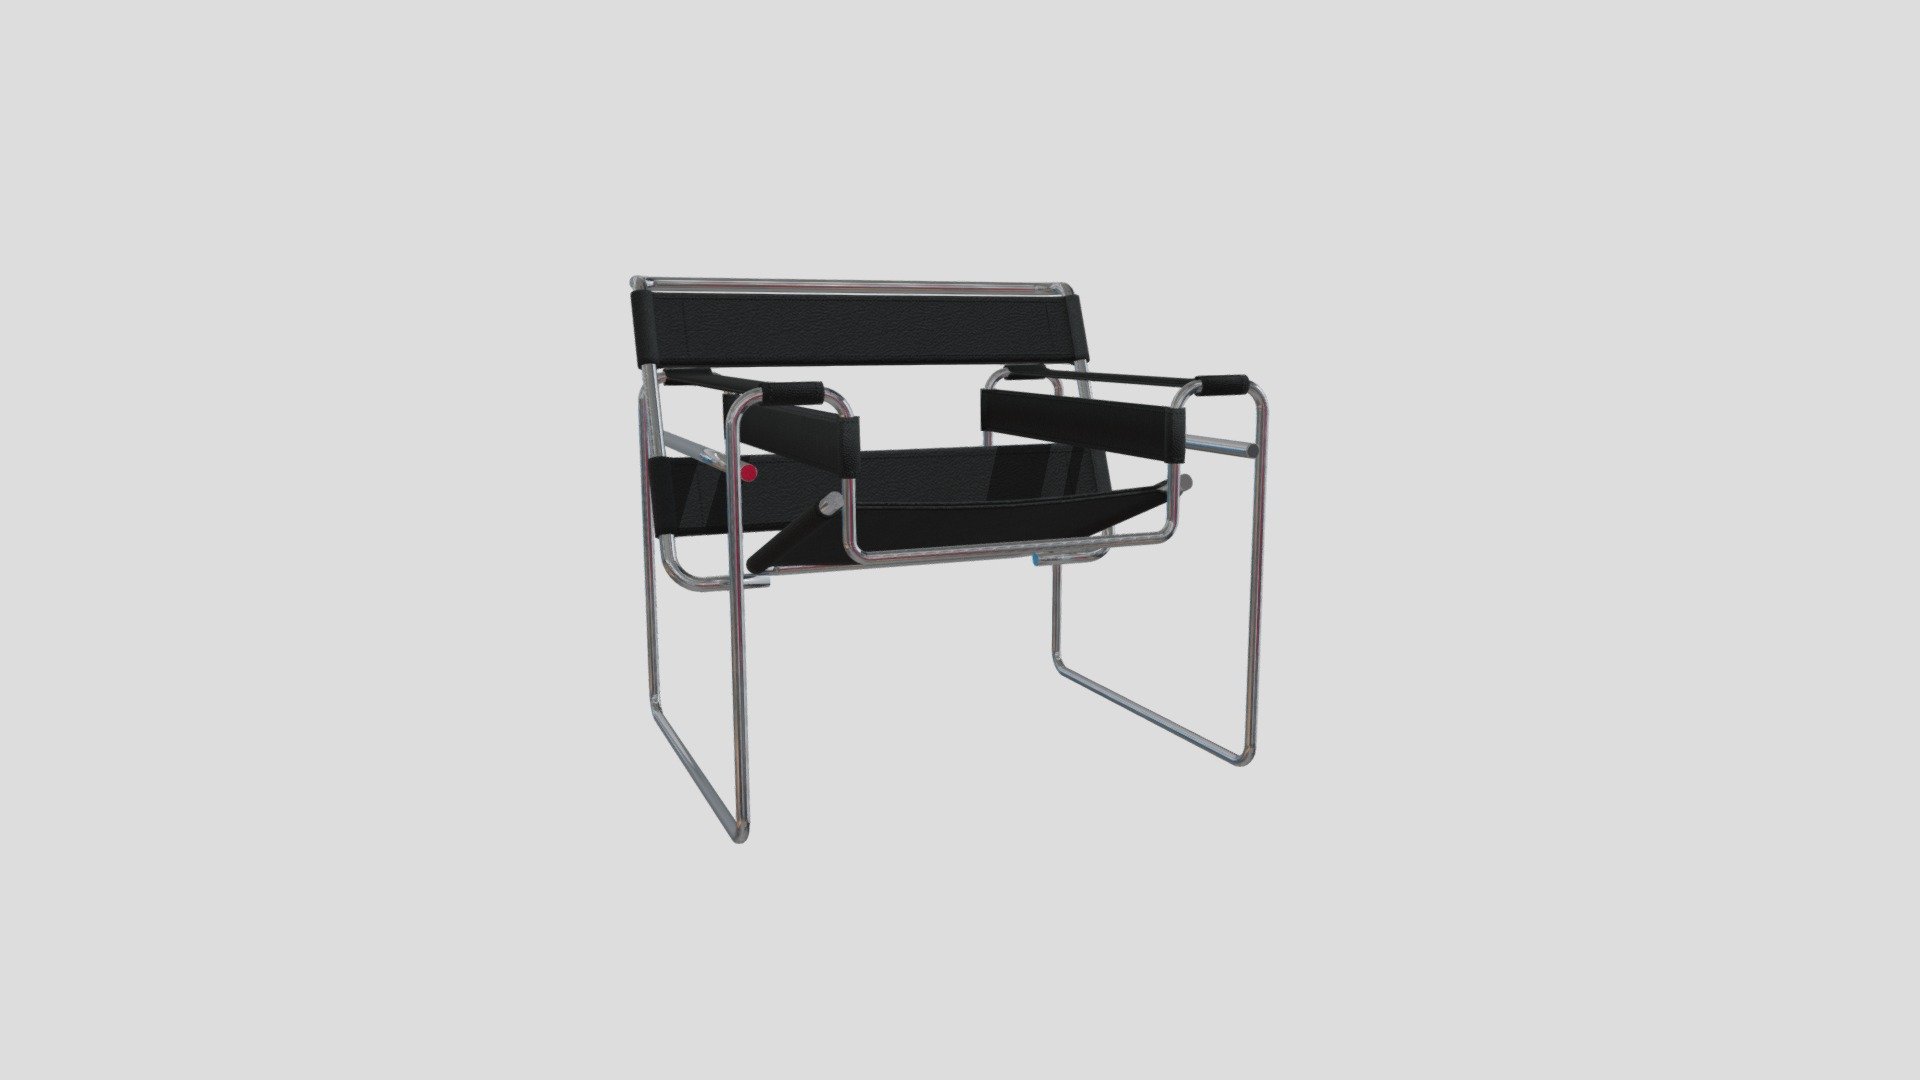 This chair was made in Blender 2.08. This piece of interior furniture is known as a Wassily Chair and was designed by Marcel Breuer in 1925-1926 at the Bauhaus in Dessau Germany 3d model